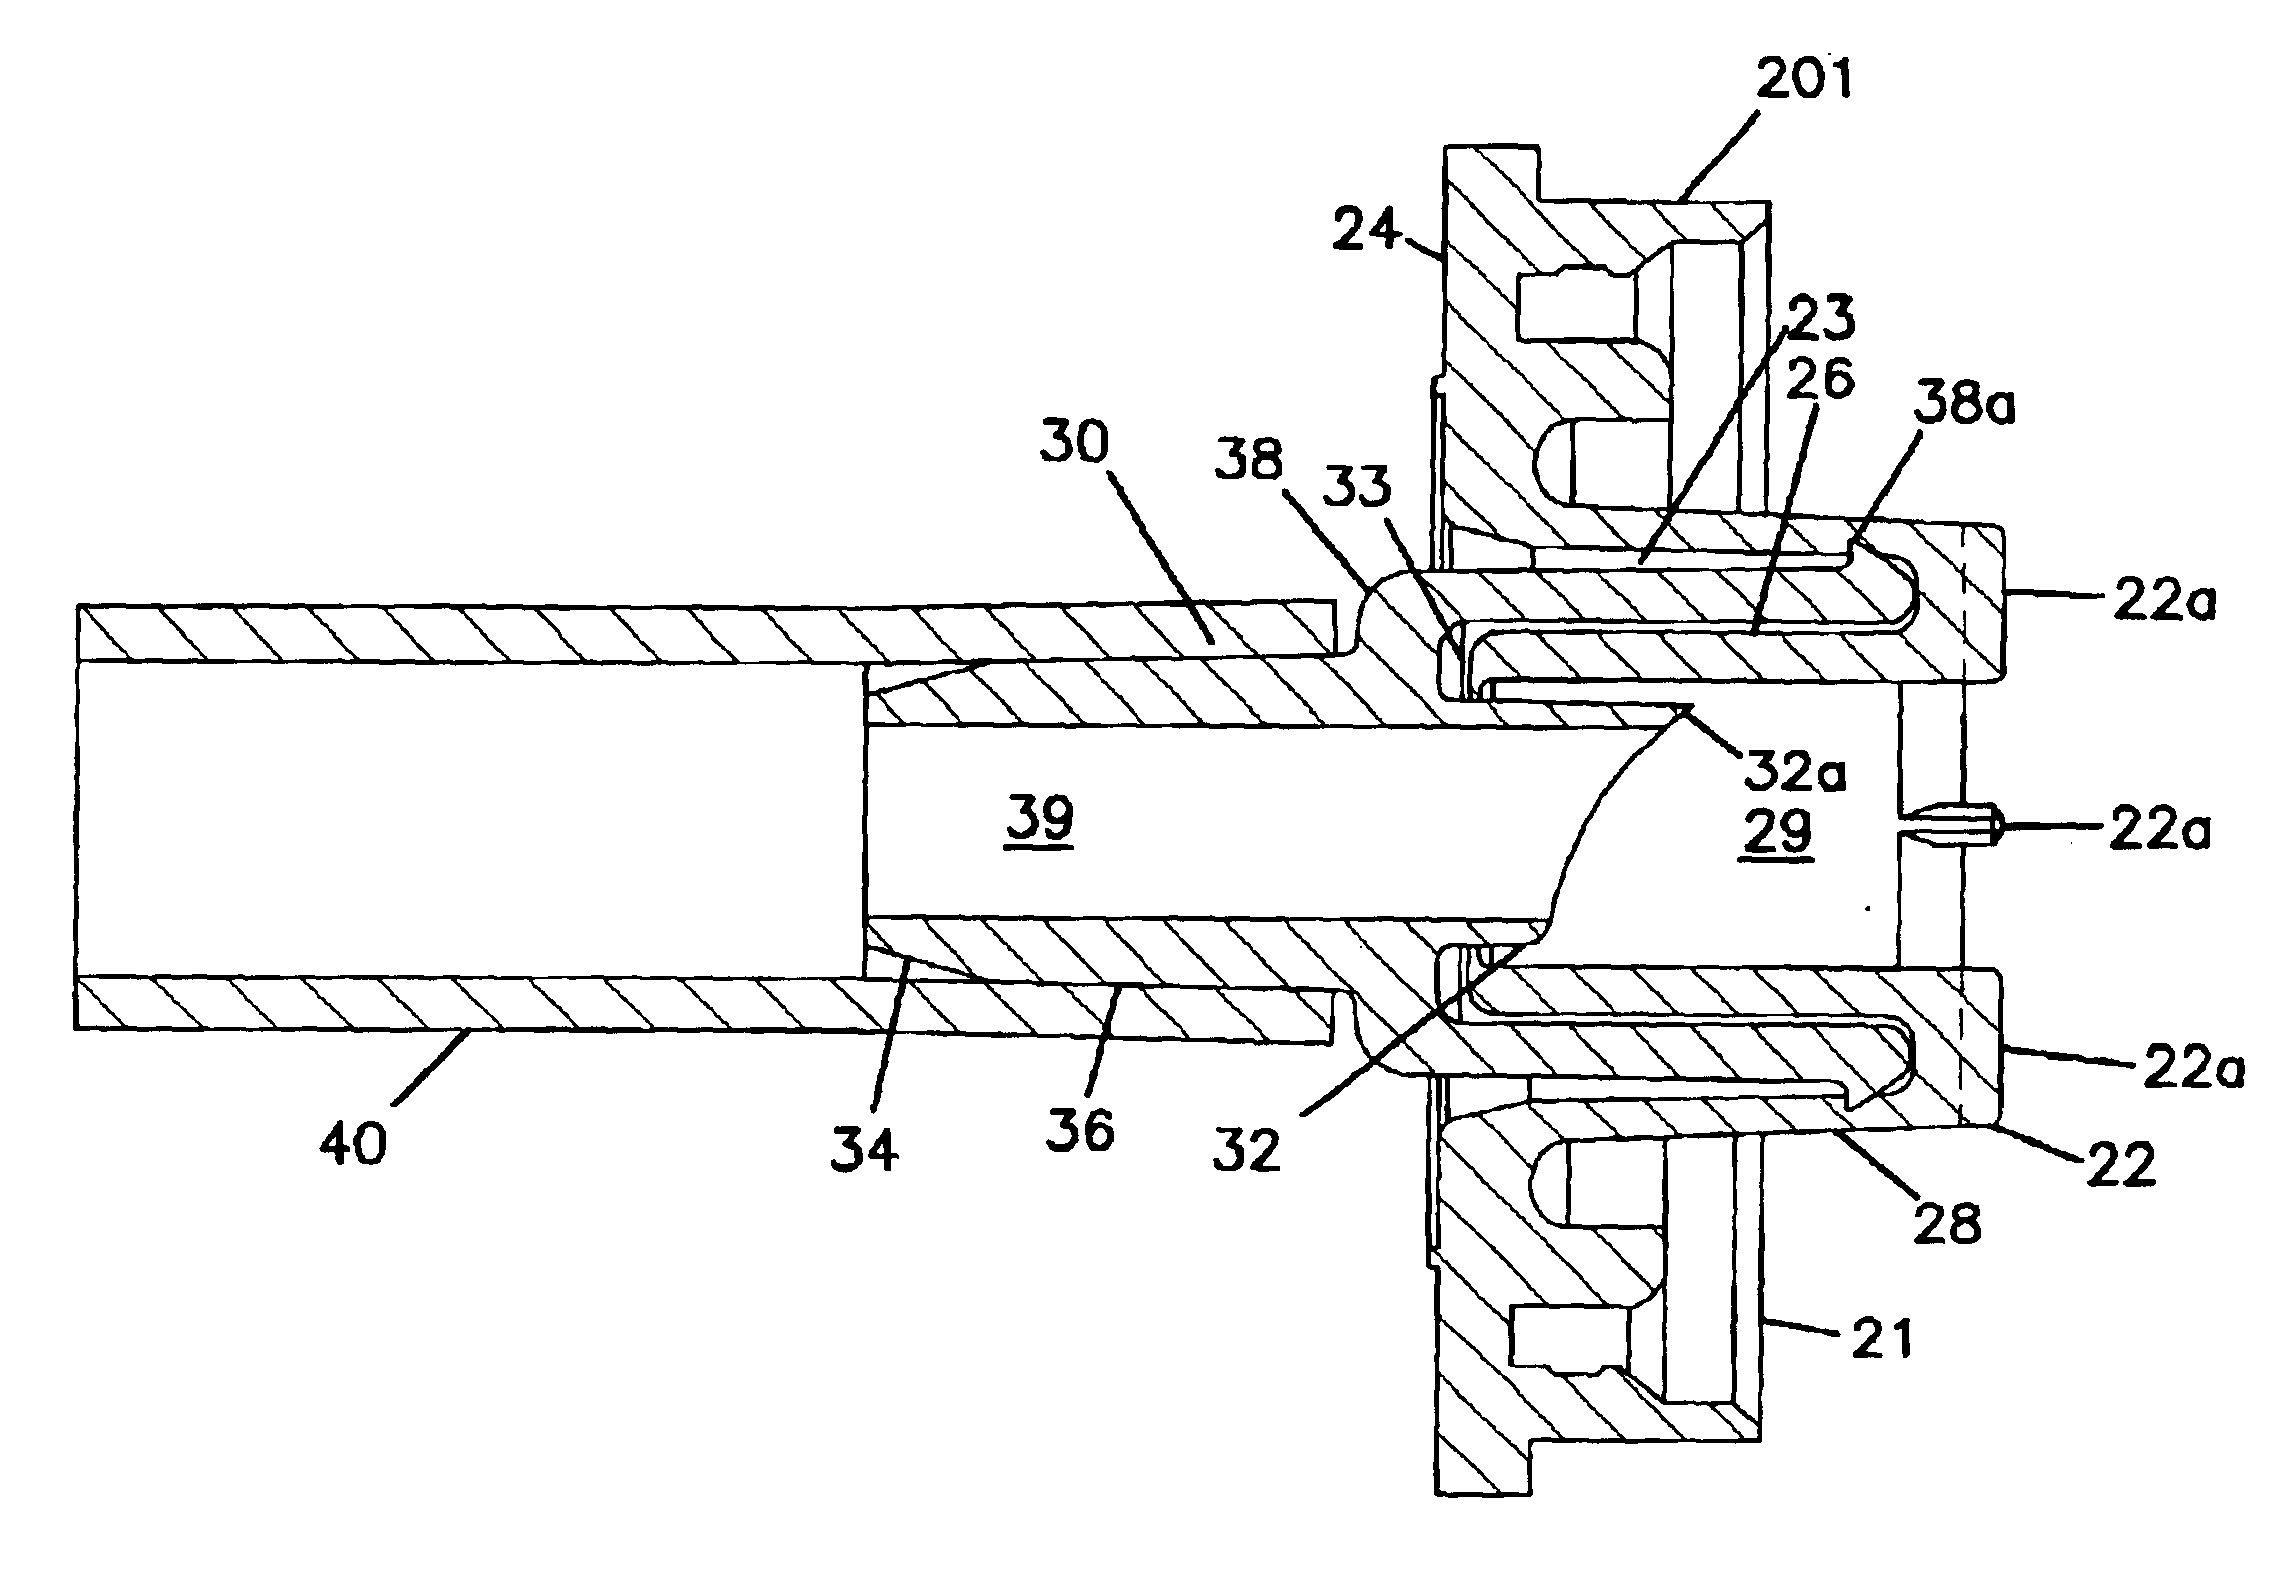 Fluid coupling with disposable connector body